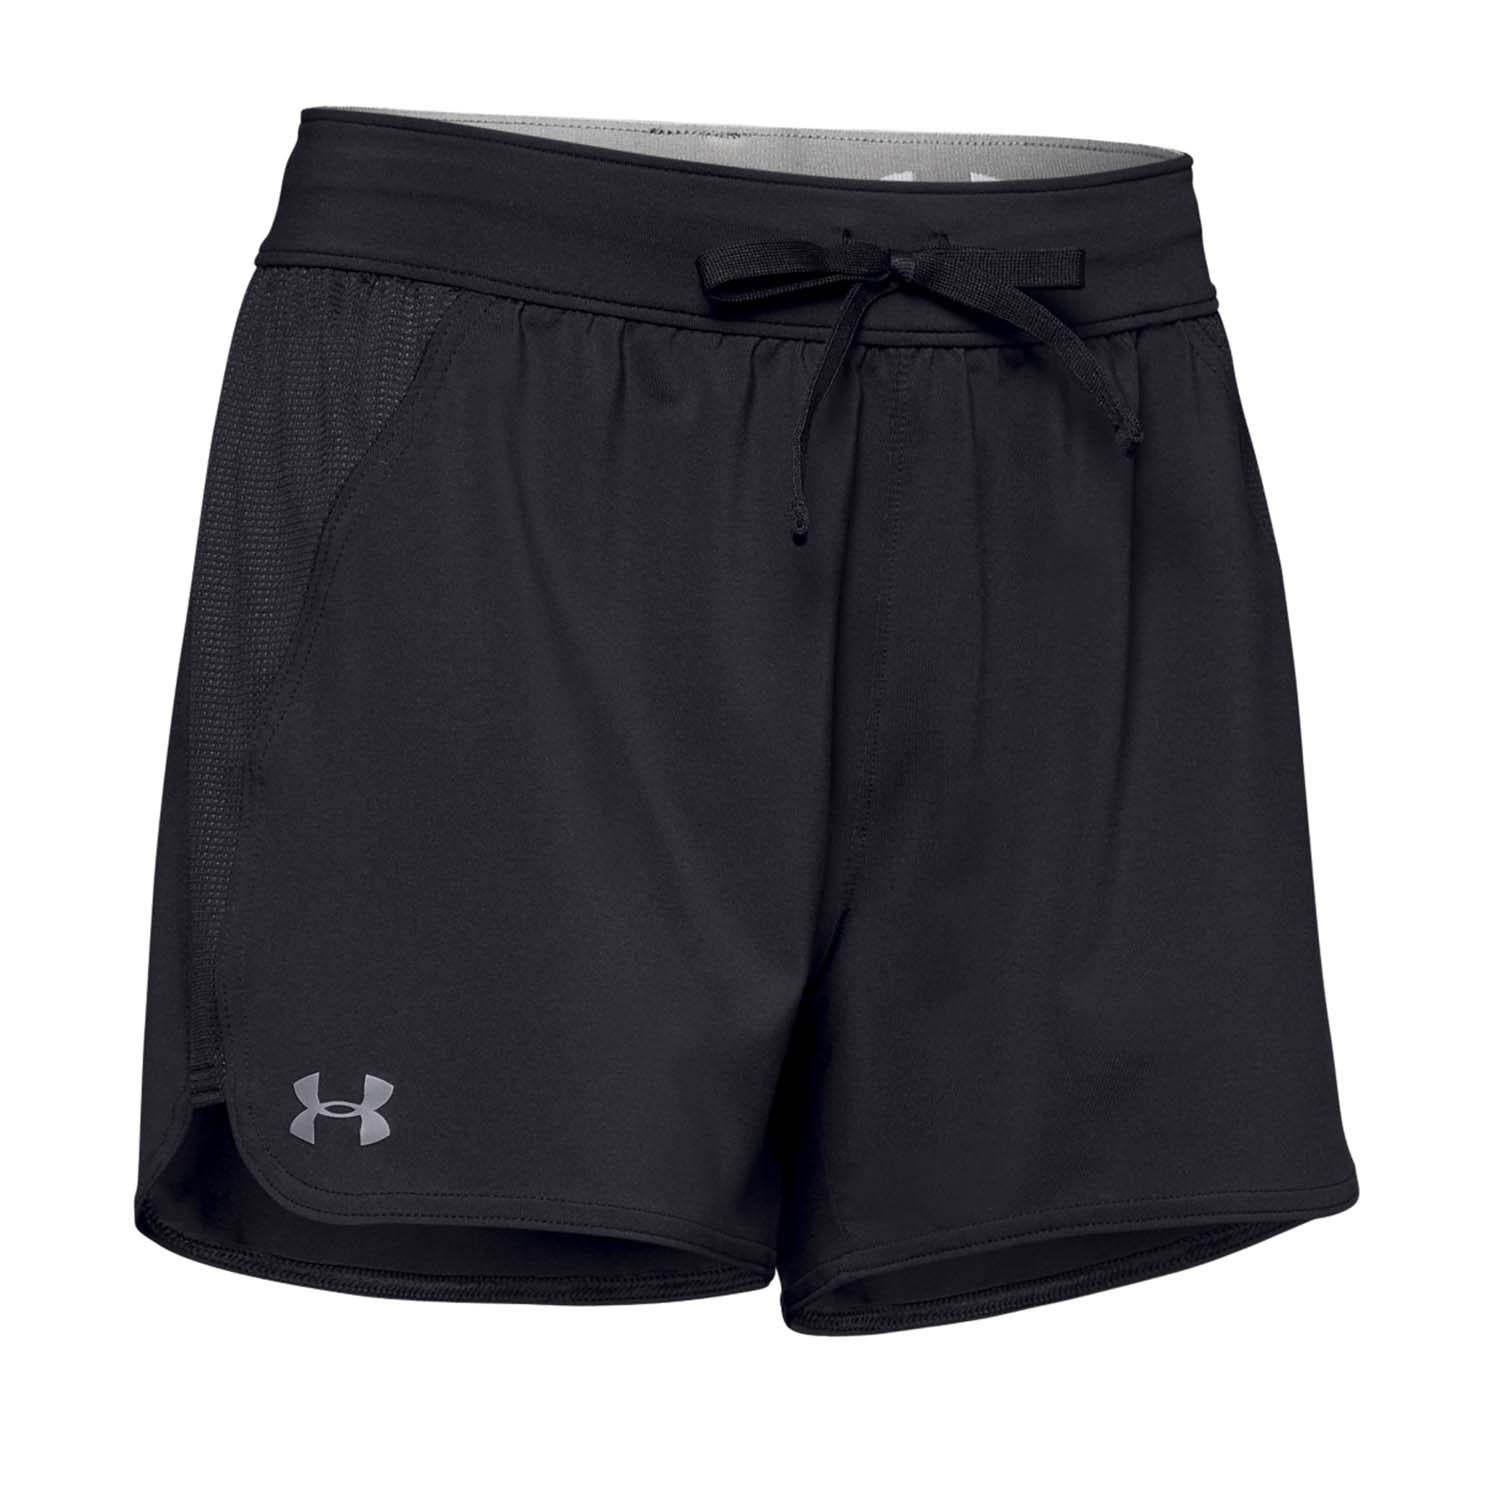 Under Armour Women's Game Time Shorts